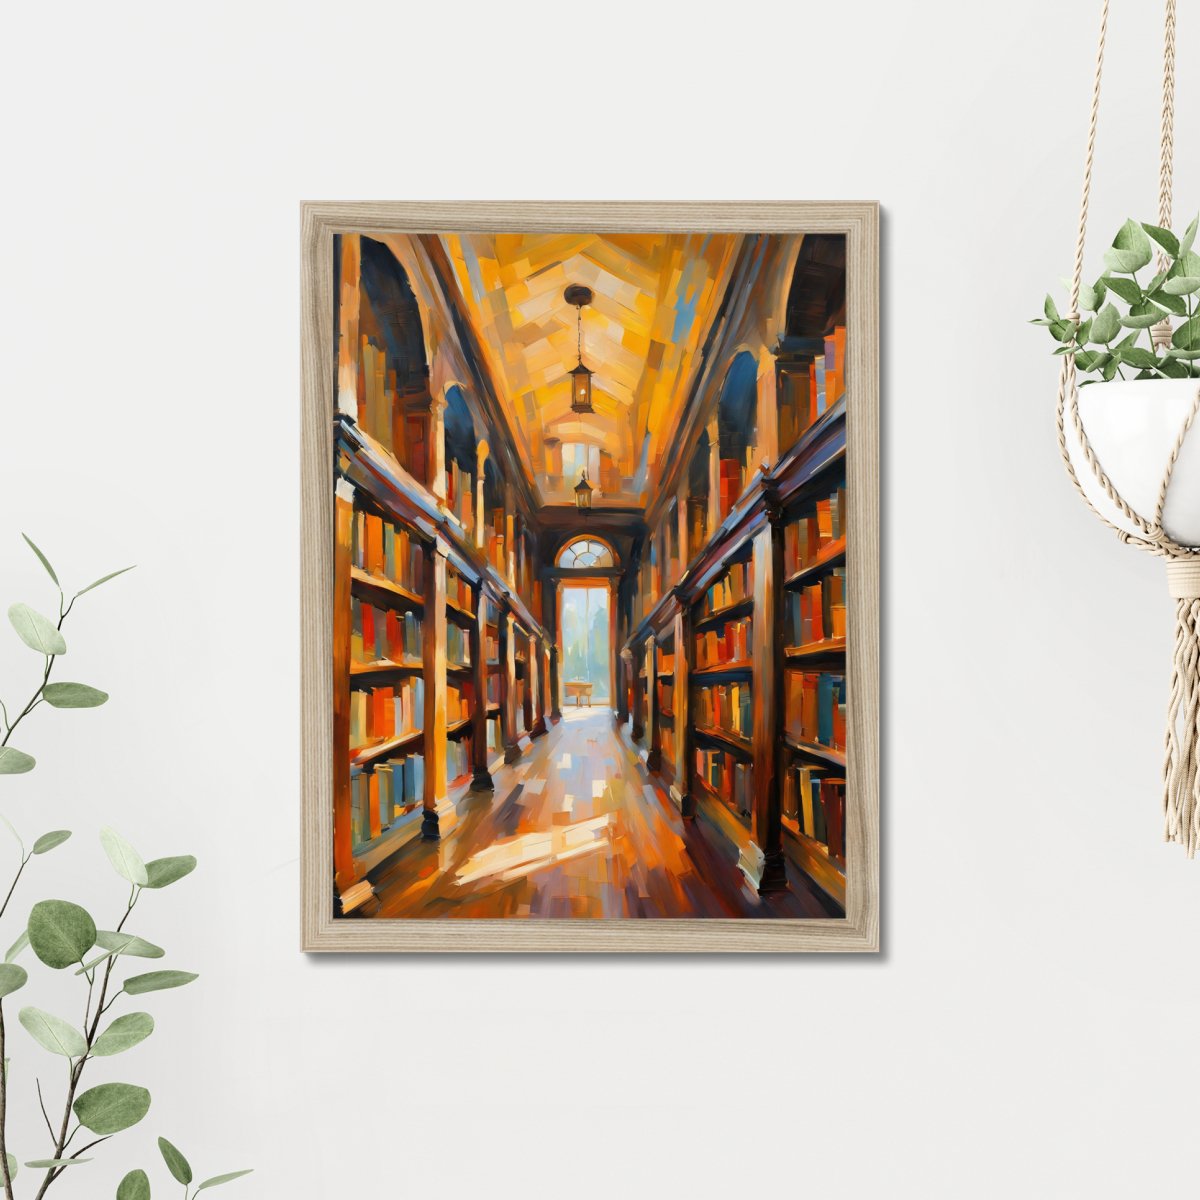 House of knowledge - Art print - Poster - Ever colorful